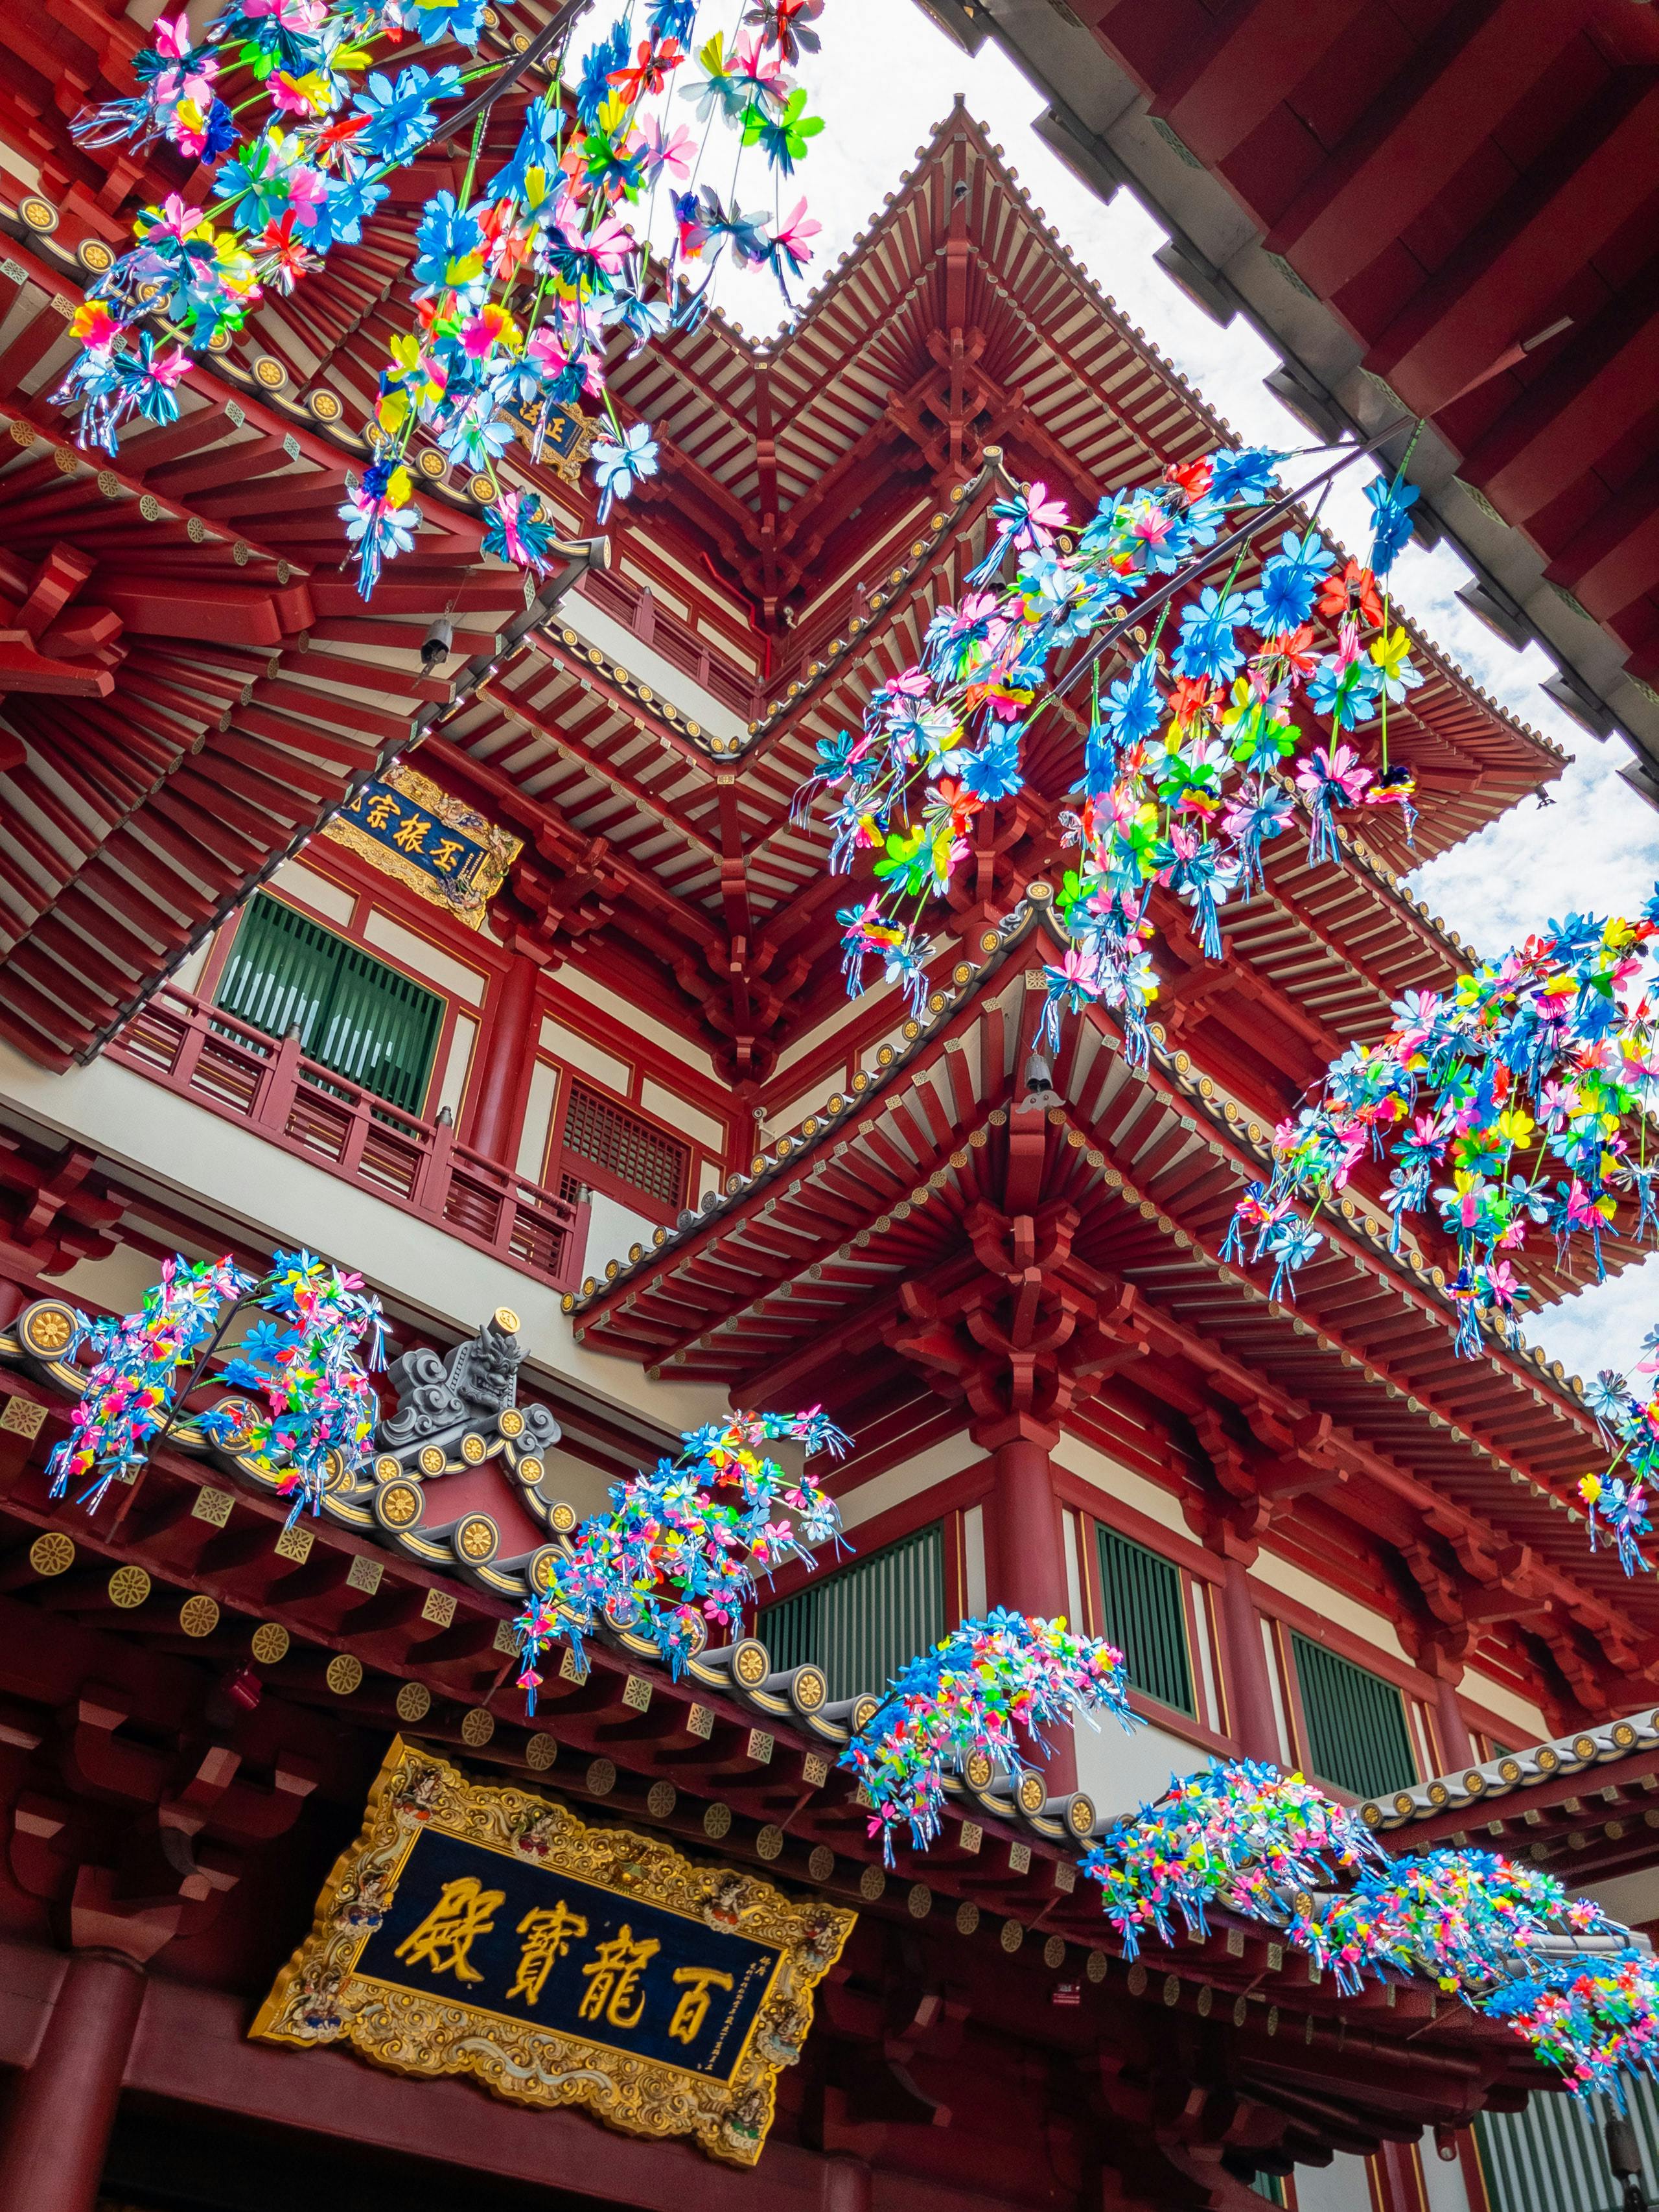 A temple with colorful decors